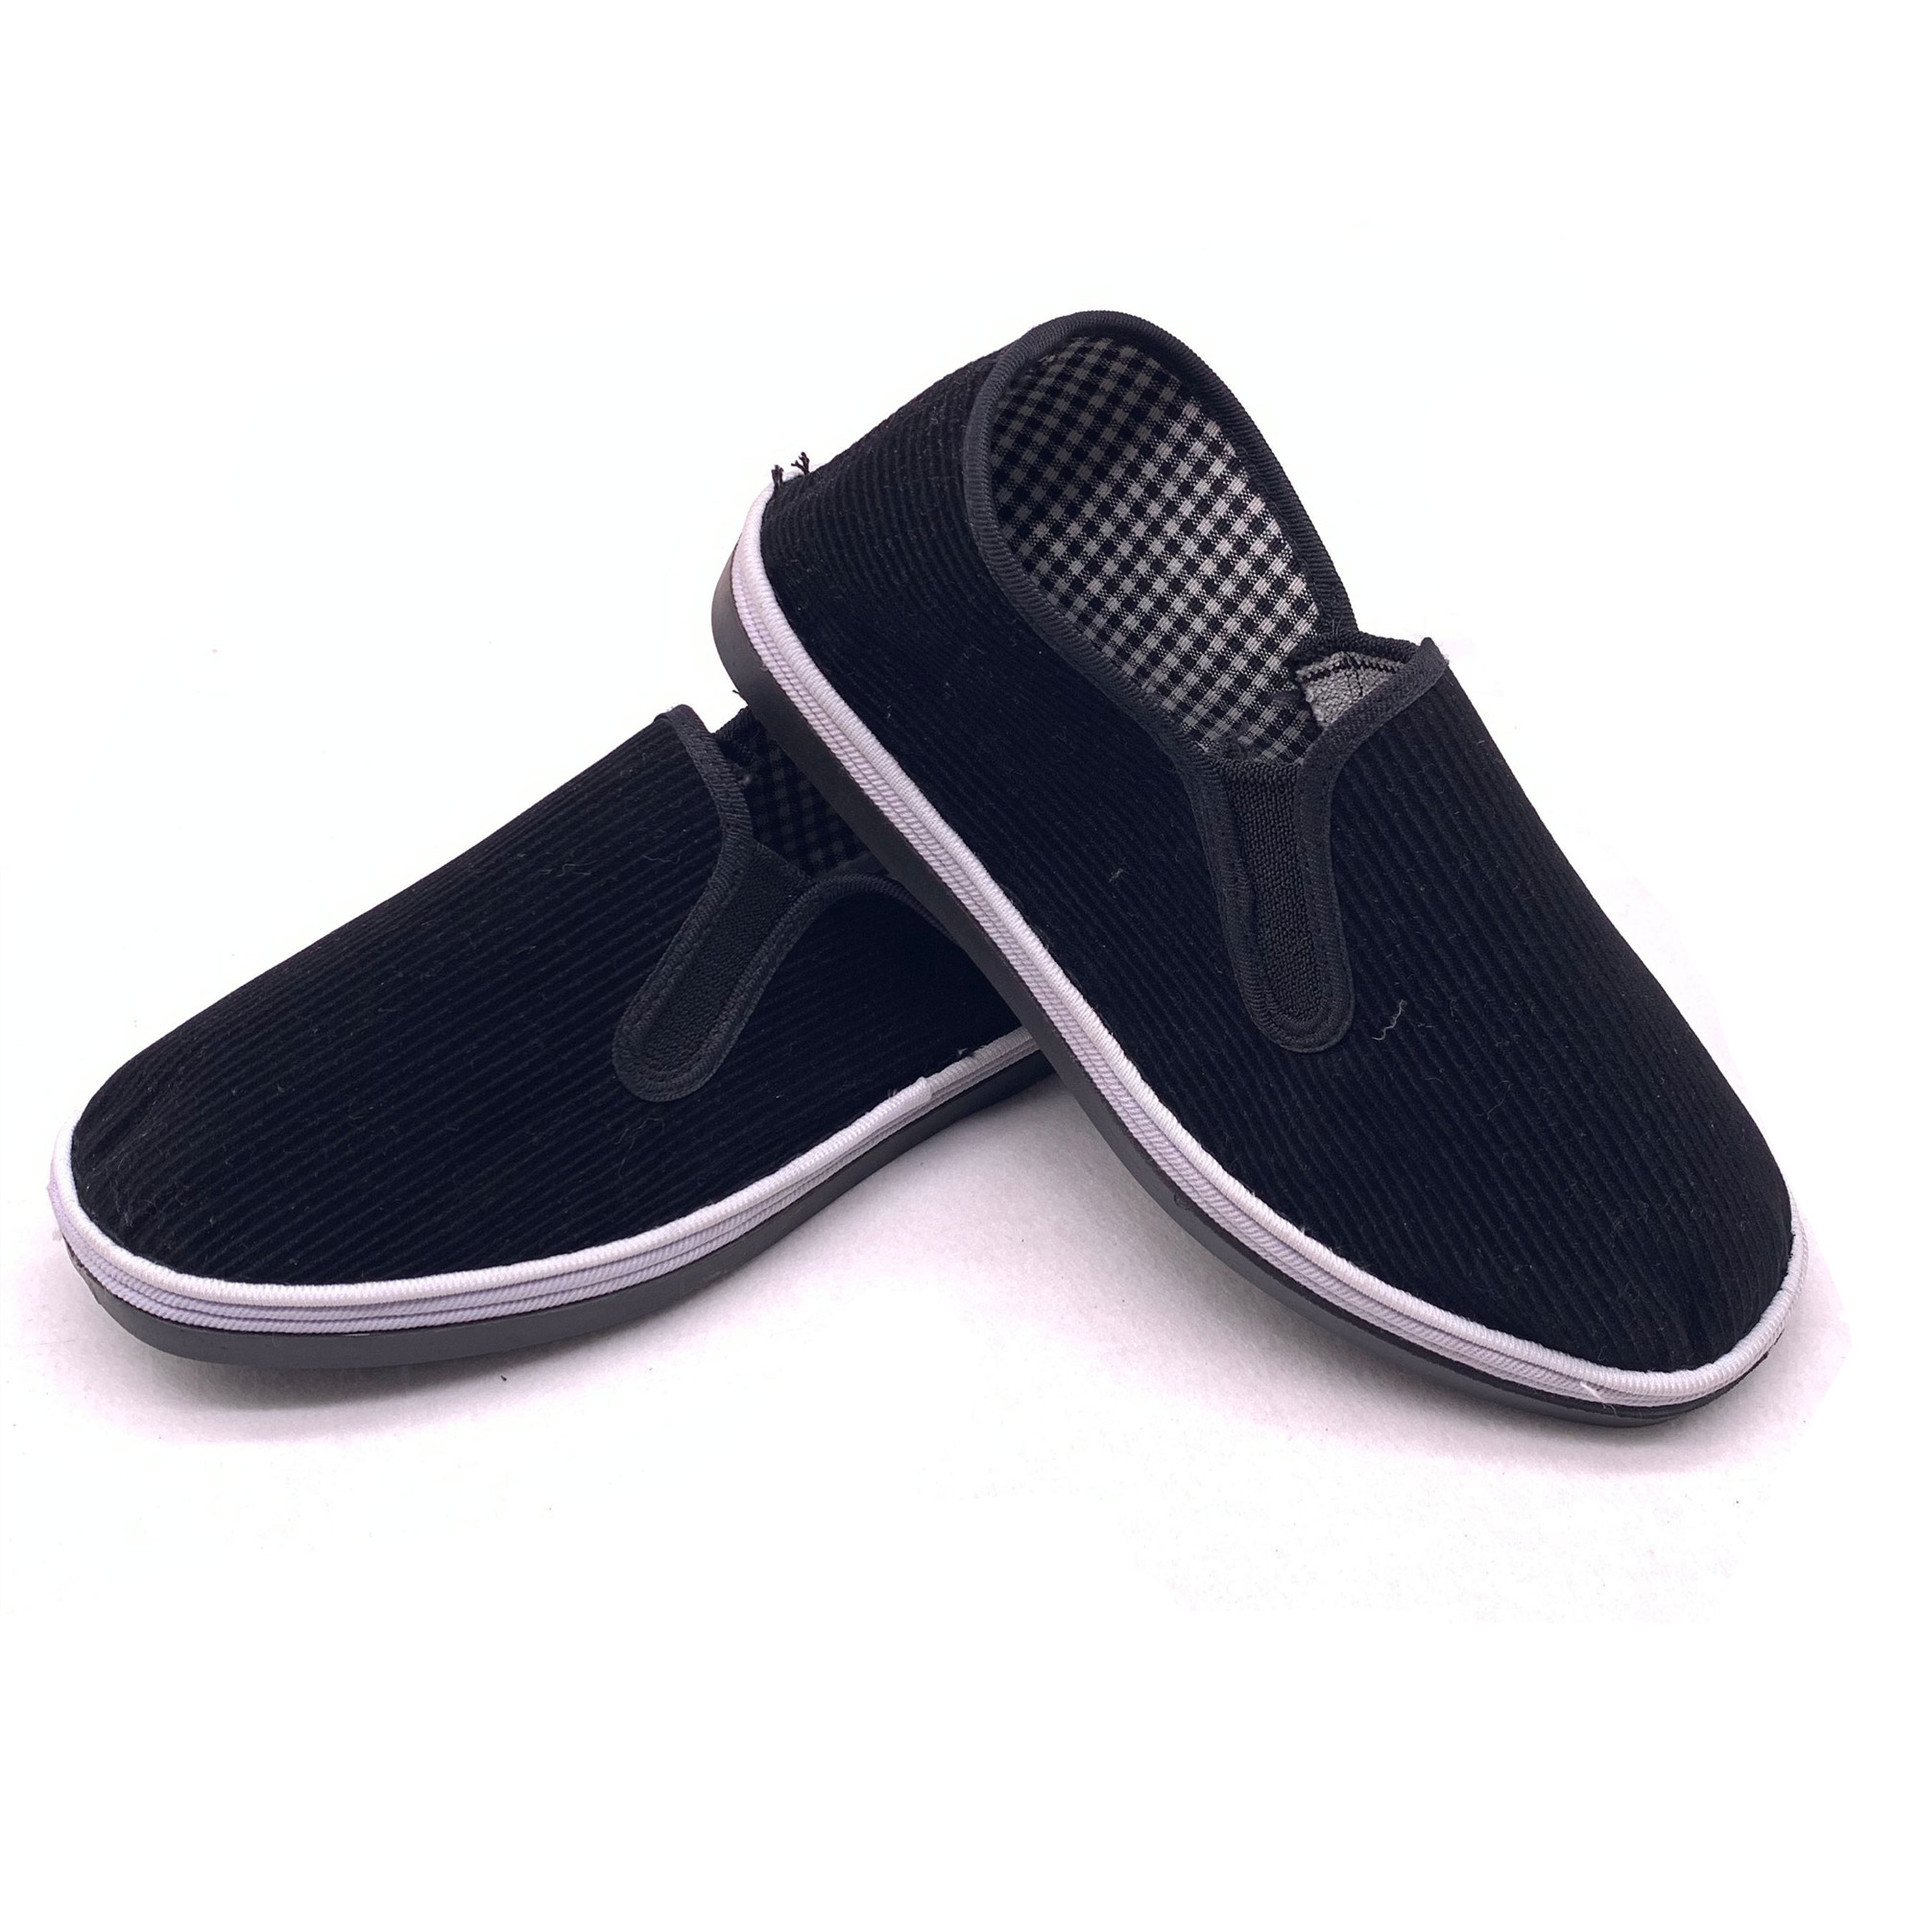 Old Beijing Cloth Shoes Men's Slip-on Middle-Aged and Elderly Casual Shoes Handmade Cloth Shoes Flat Heel Soft Bottom Corduroy Cloth Shoes